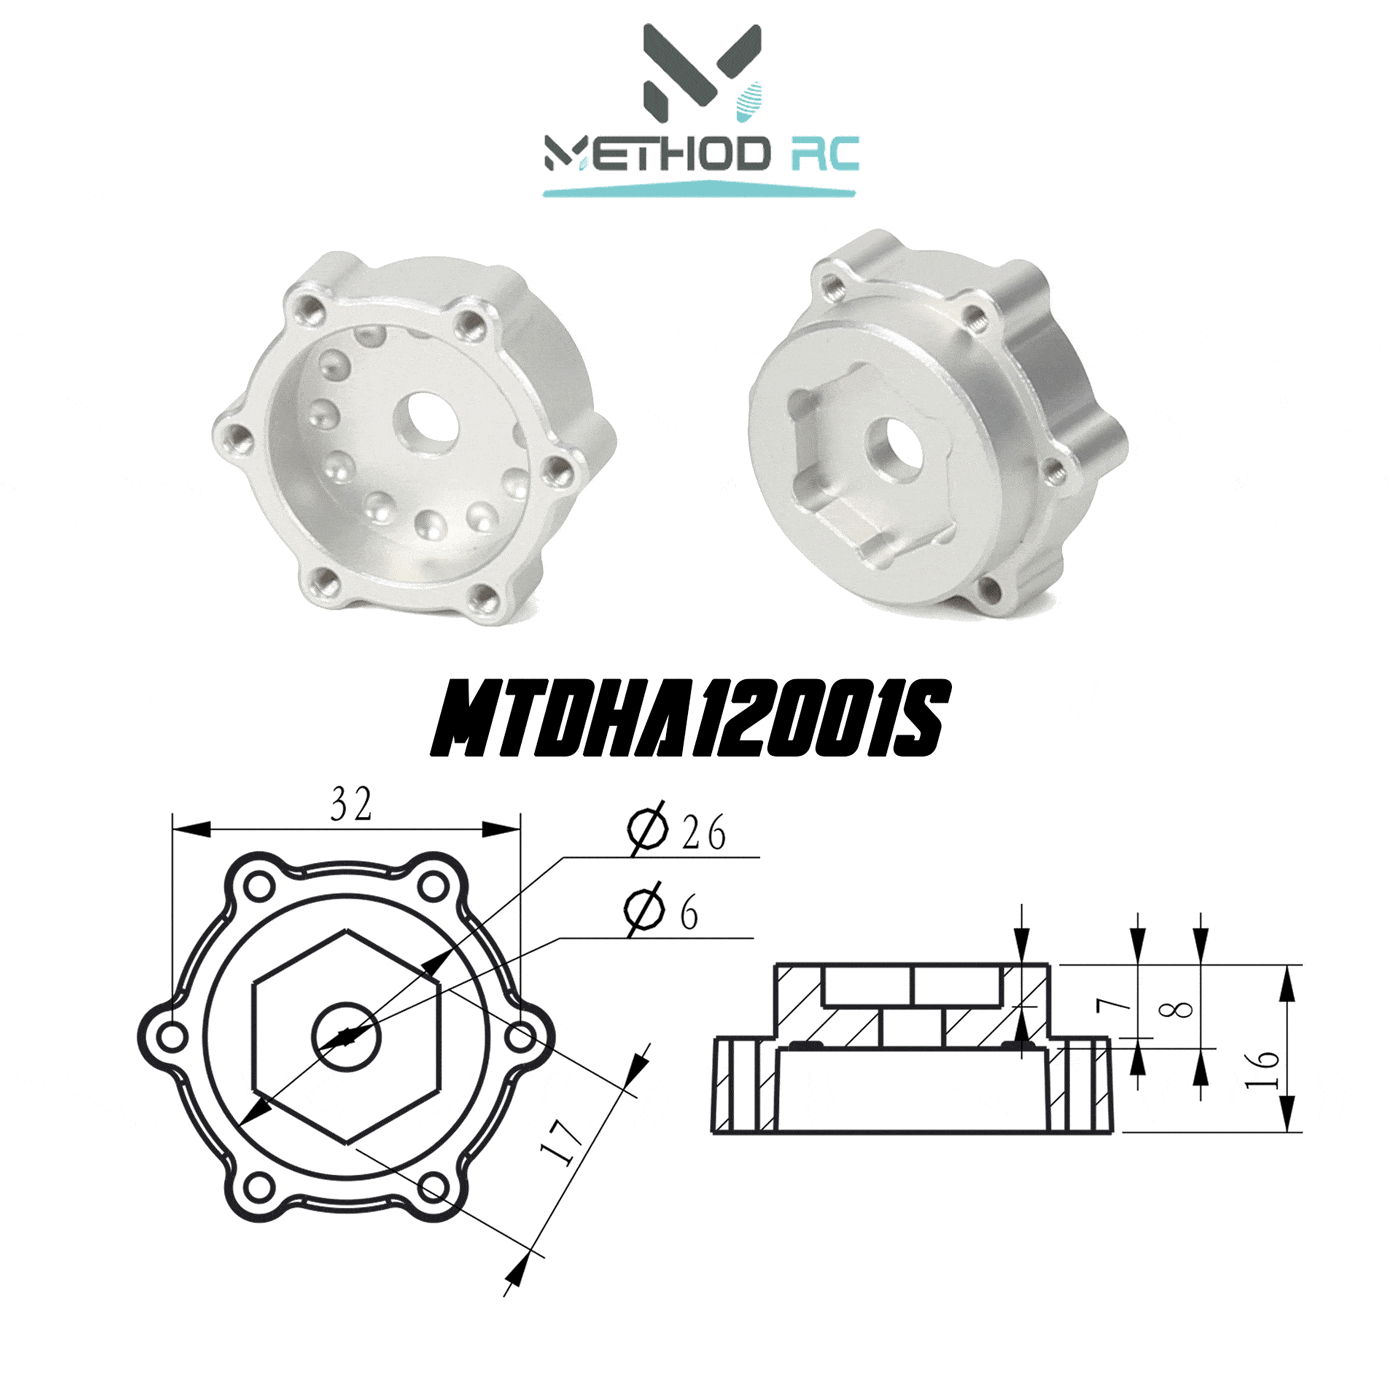 Method RC Wheel Hexes Silver 6 x 32mm / 12mm Offset Hex Adaptor for use with Traxxas UDR (2pcs)